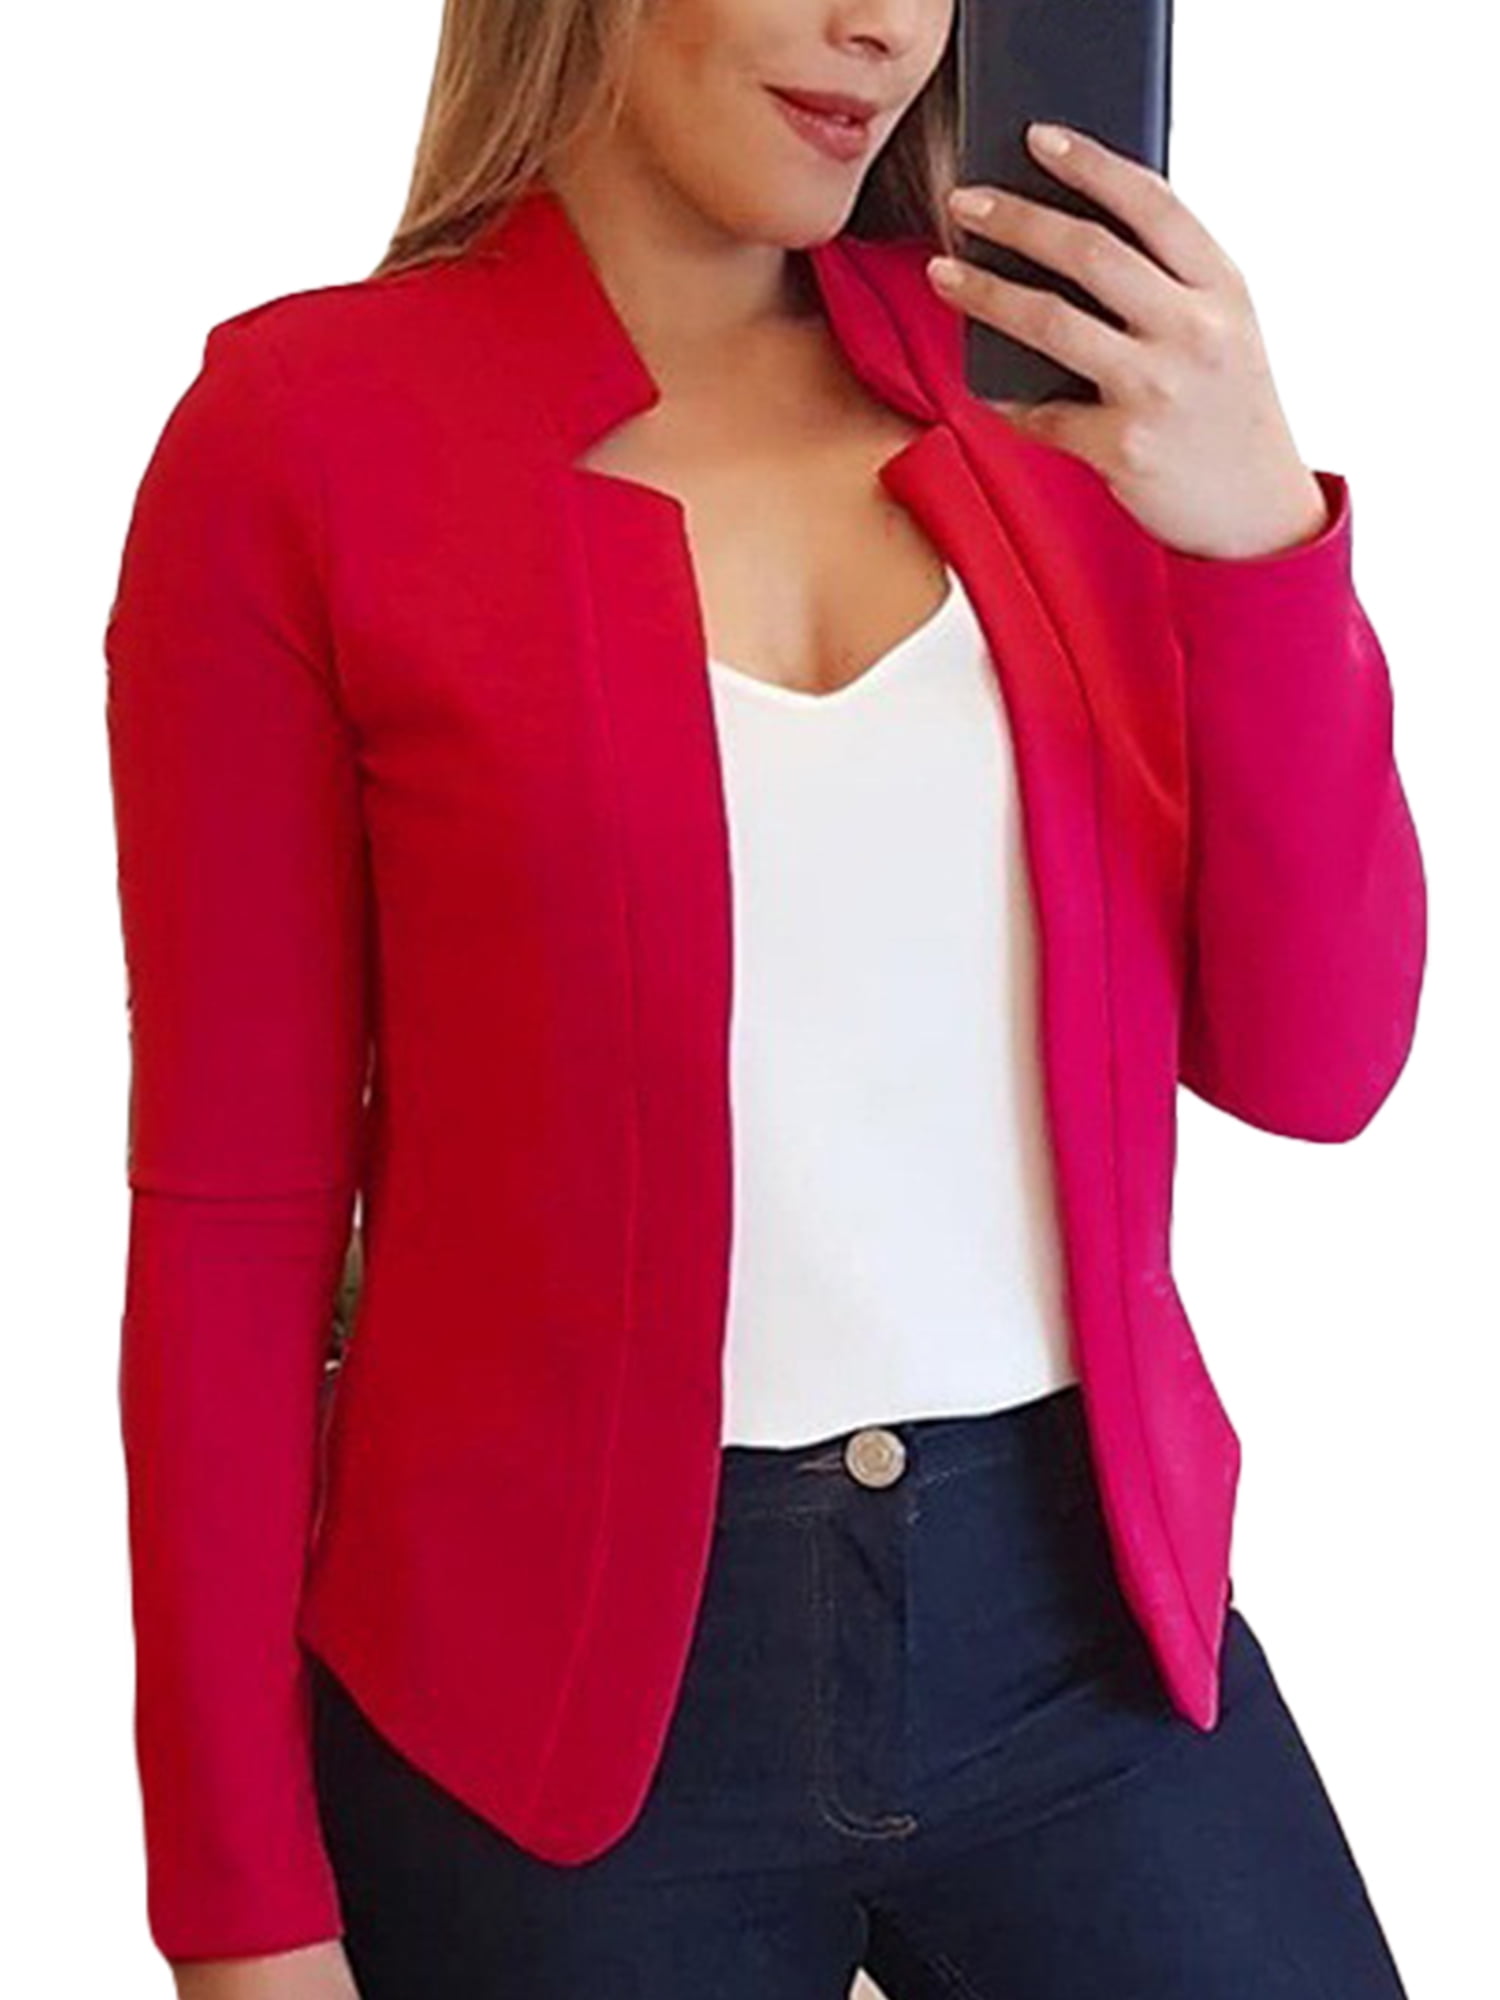 Coolred-Women Solid Colored Work Slim Fit Notch Collar Cardigan Blazer Jacket